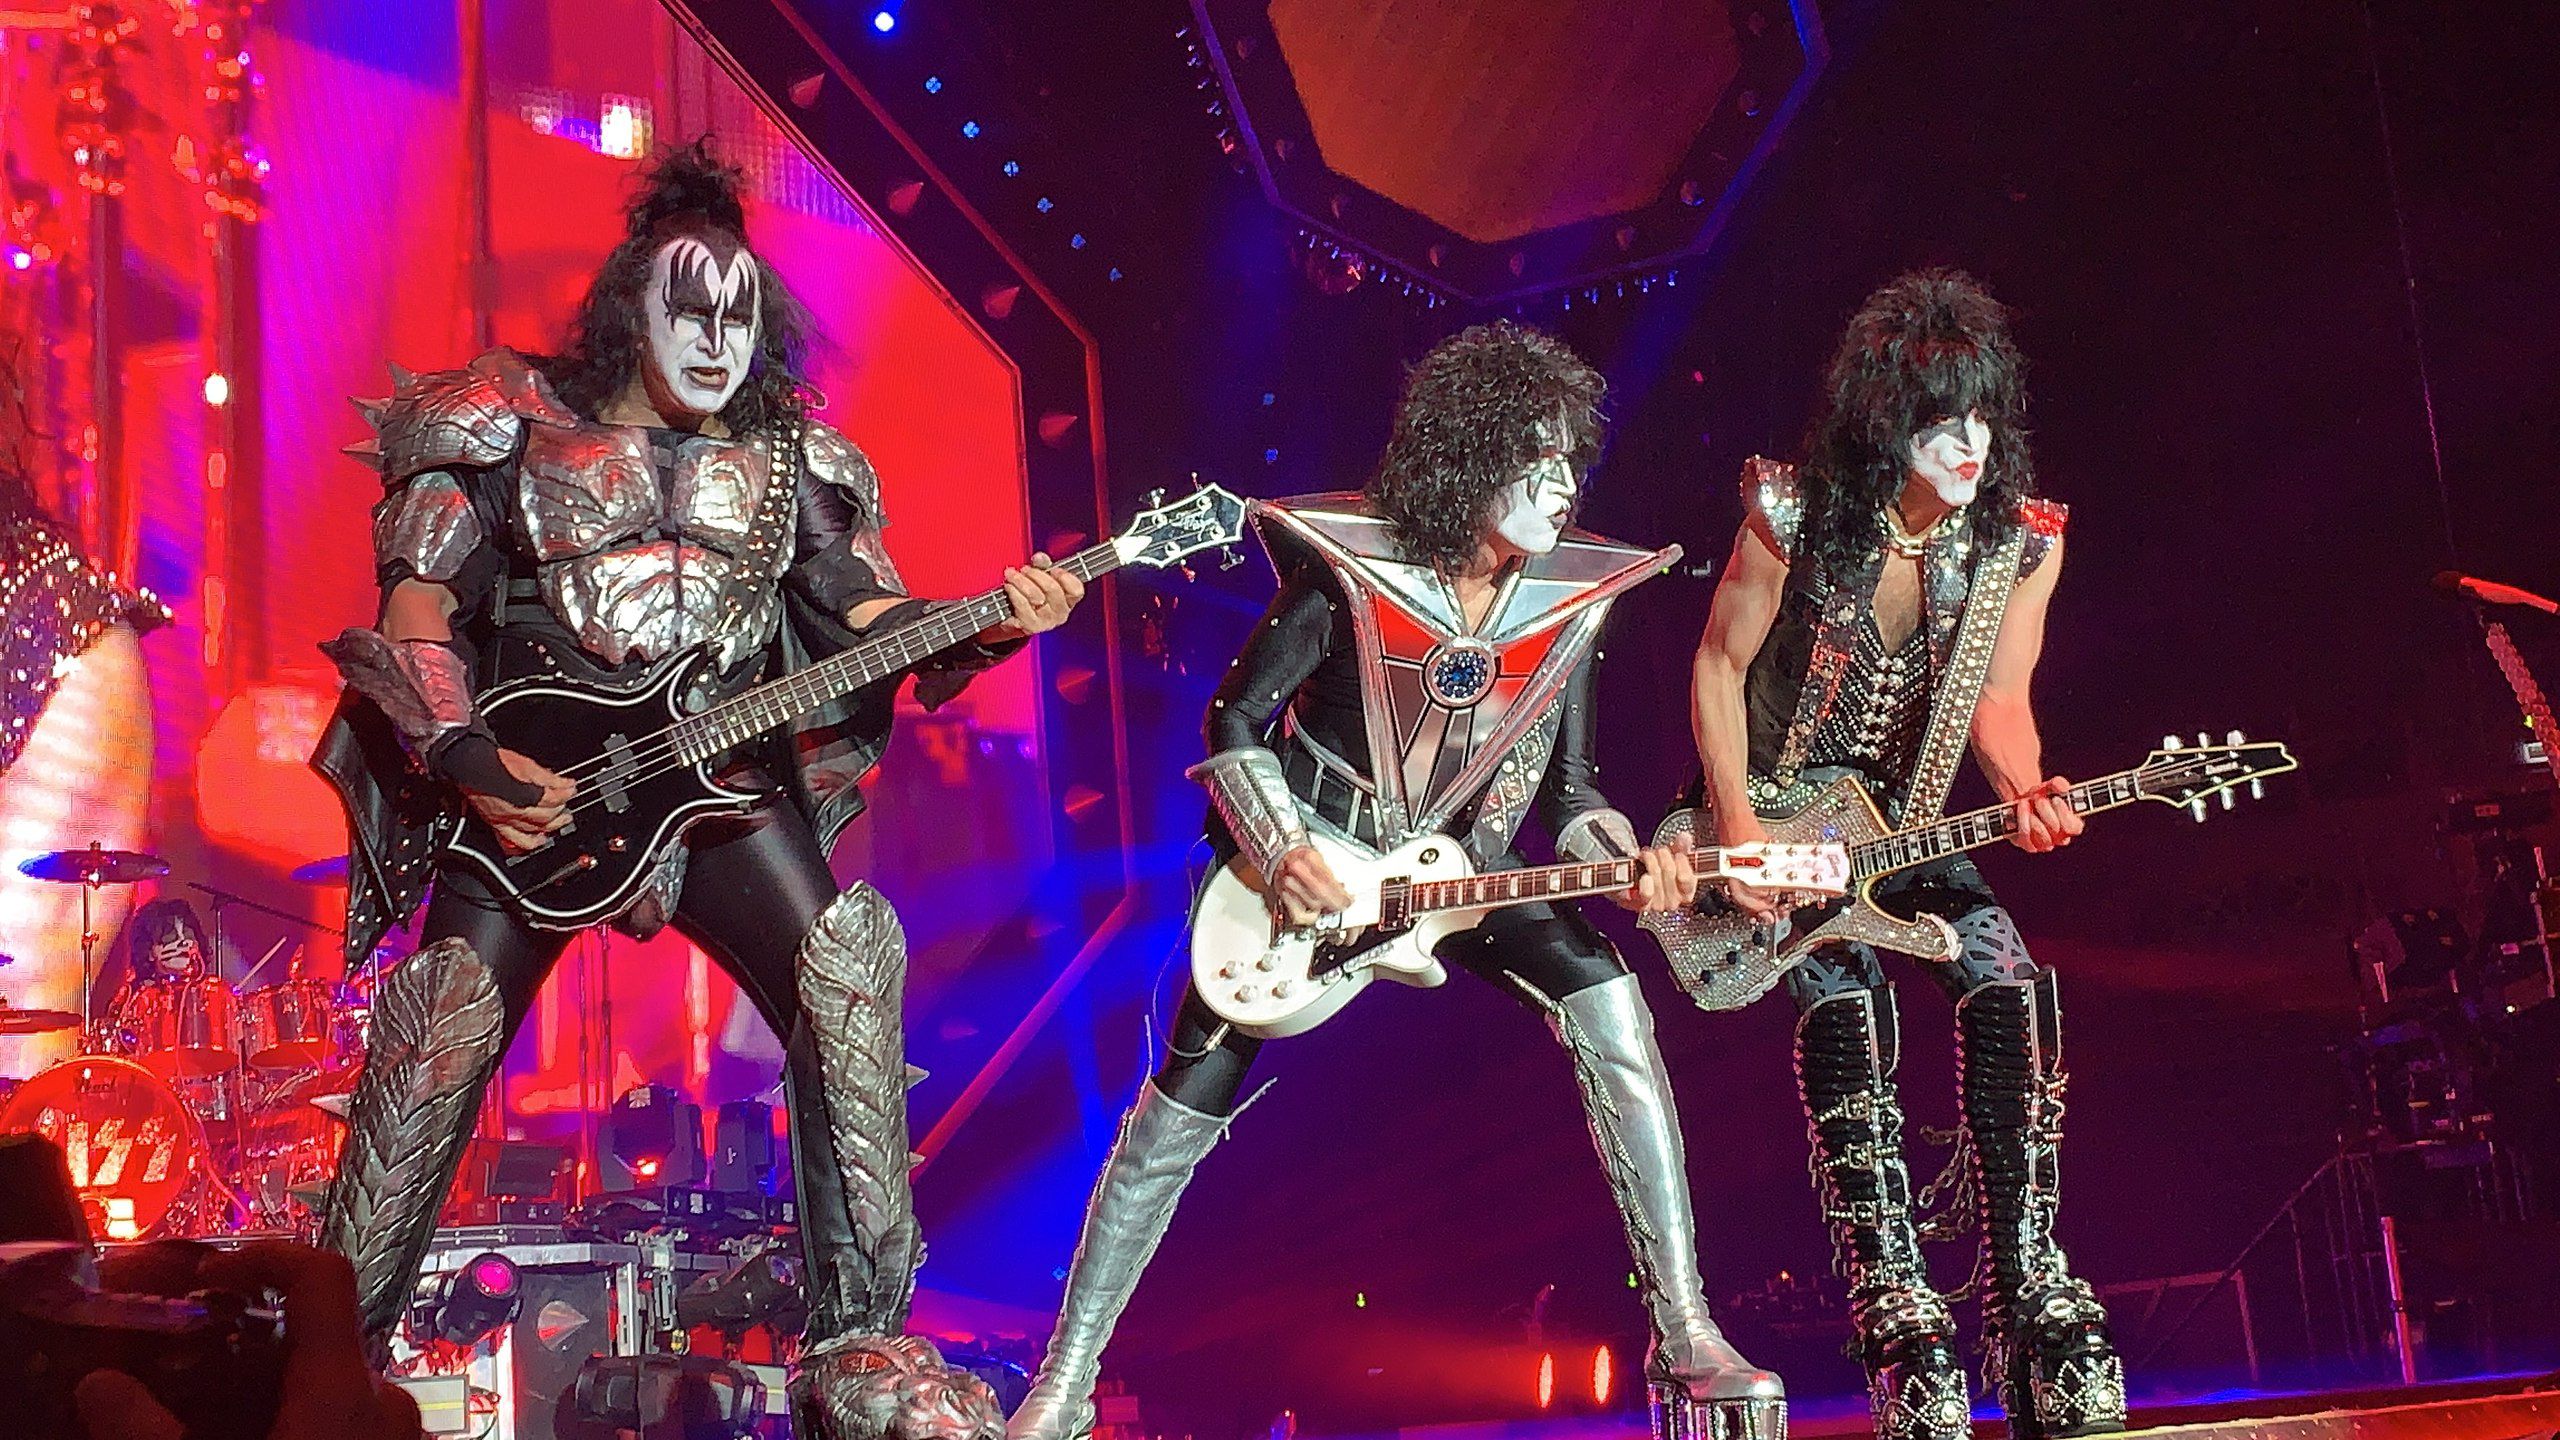 <p>Just one year later, KISS was back on the road again. Currently, the band is in the midst of their <a href="https://www.rollingstone.com/music/music-news/kiss-end-of-the-road-tour-2021-dates-1183714/">"End of the Road World Tour,"</a> which has been delayed because of COVID-19.</p>